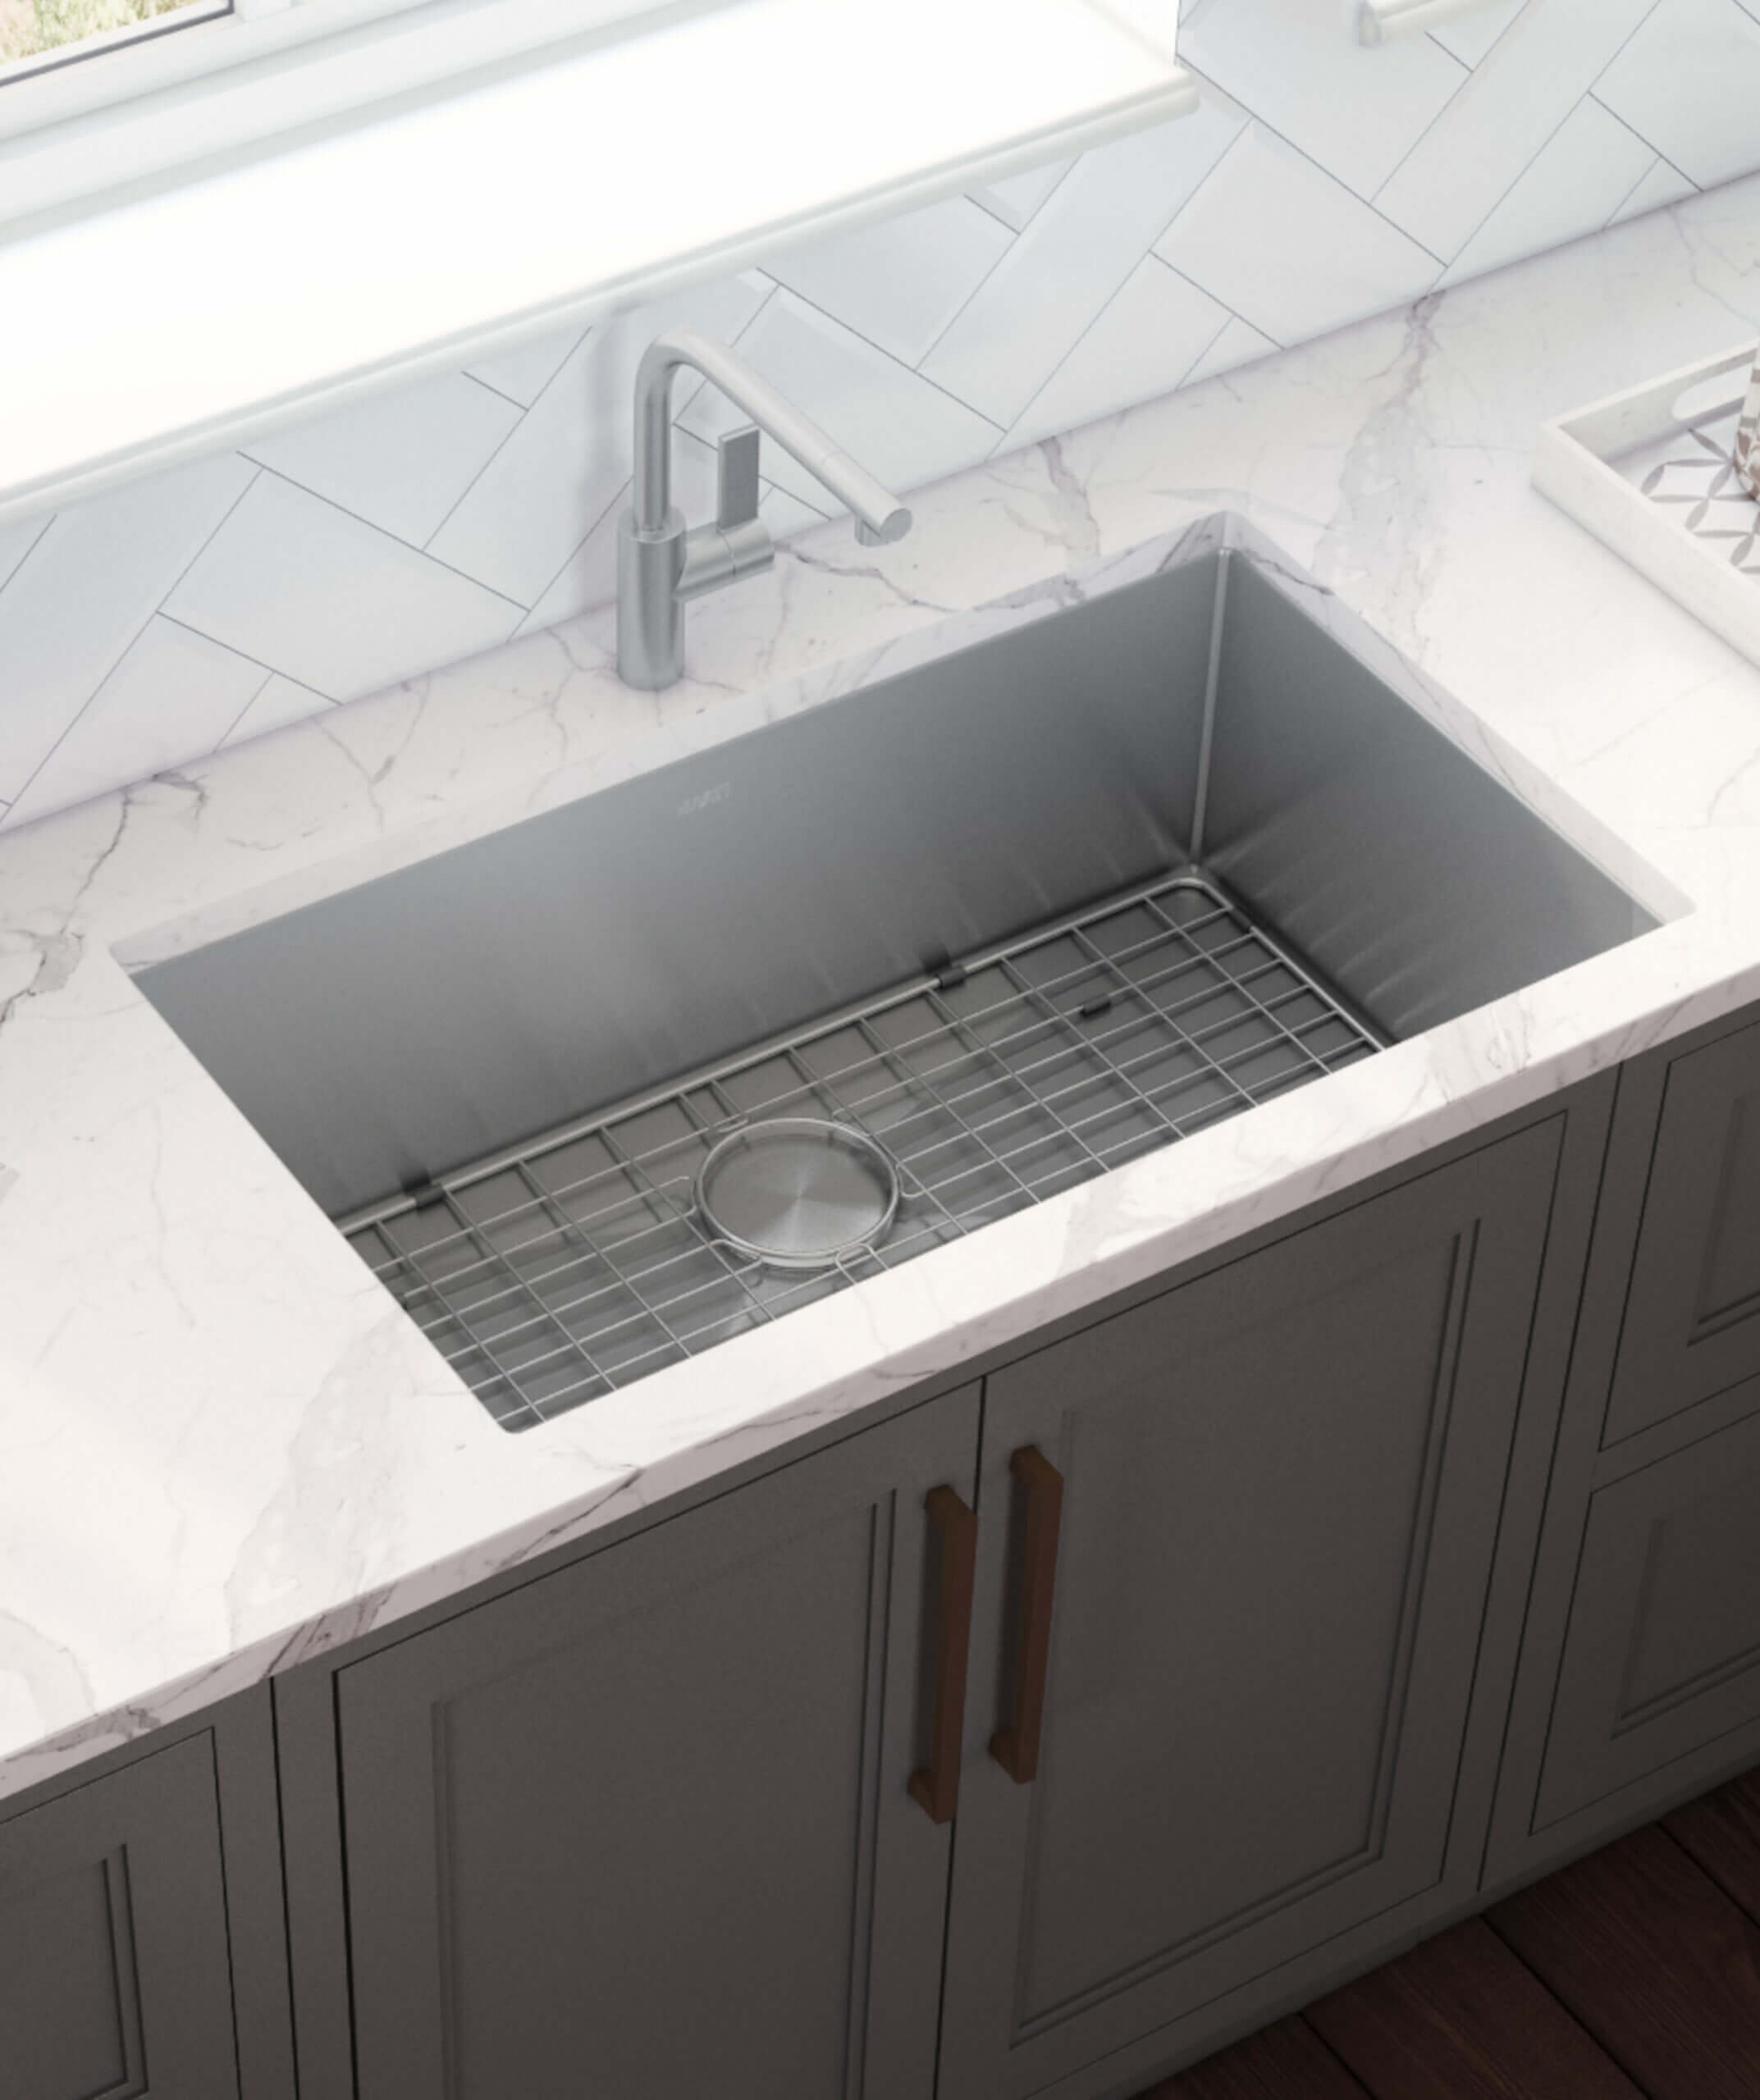 A Guide to Replacing Sink Strainers in Kitchen Sinks